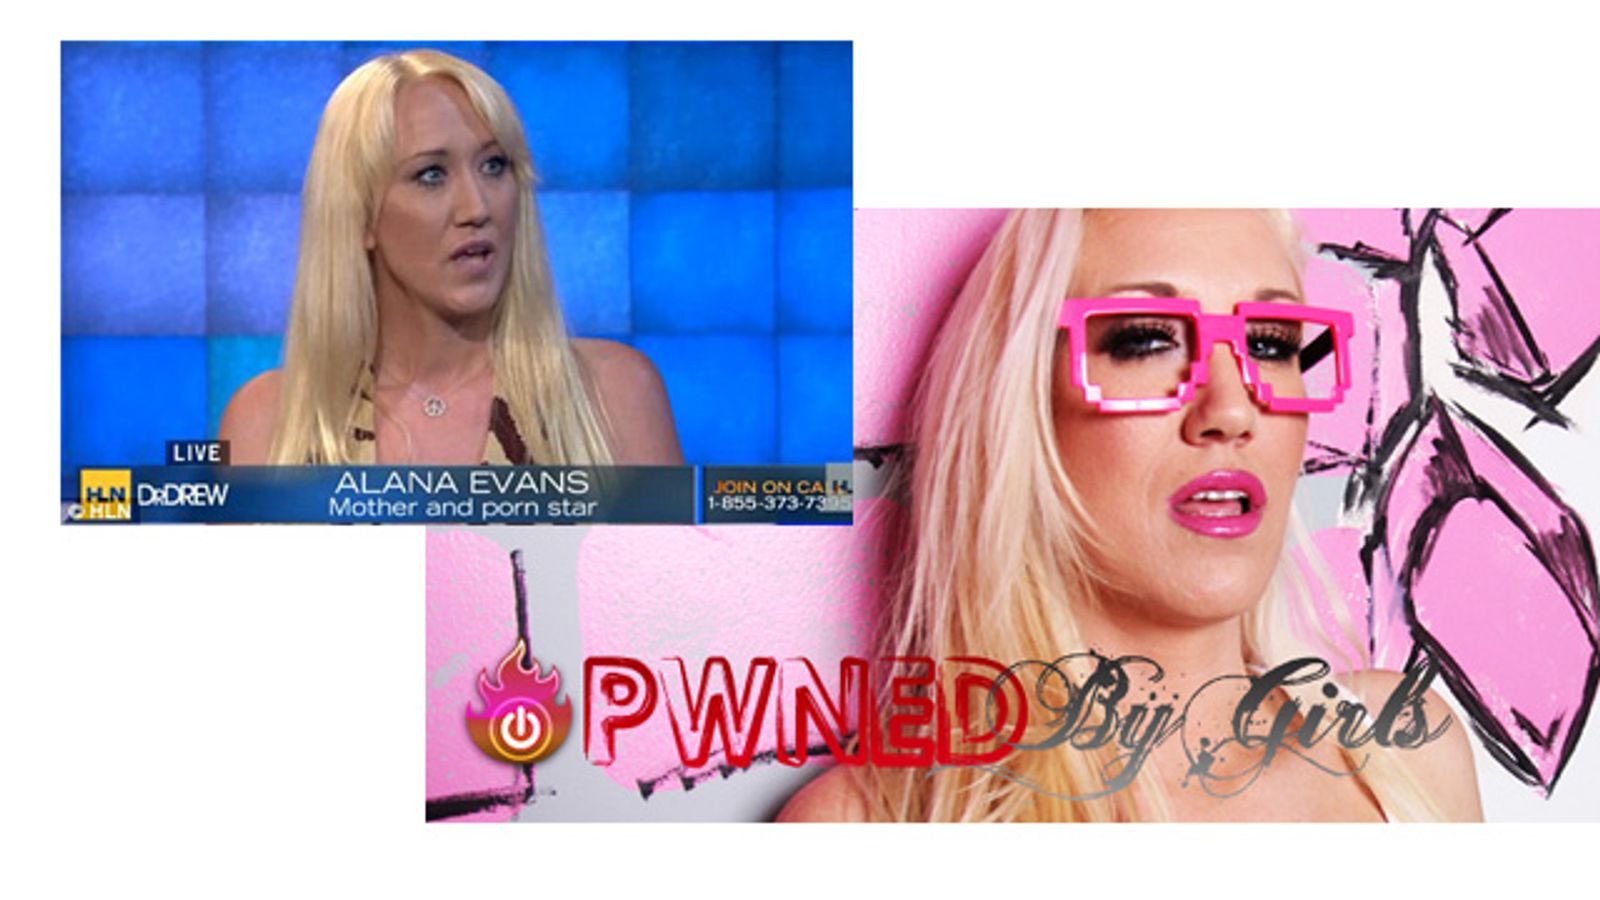 Alana Evans To Appear on HLN Network Today